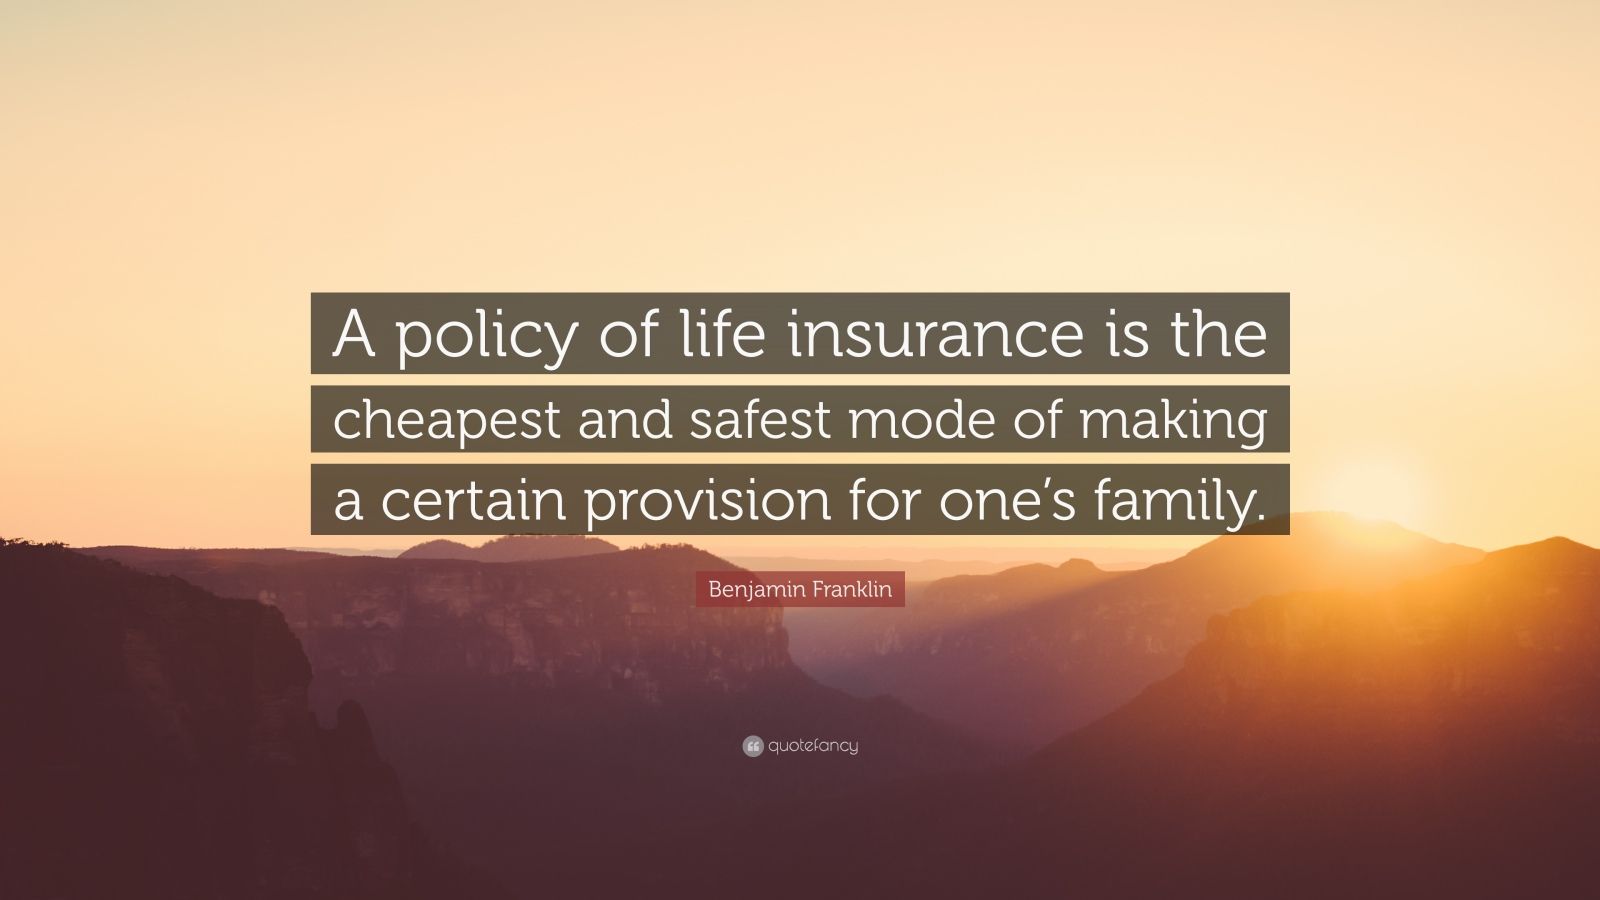 Benjamin Franklin Quote: “A policy of life insurance is the cheapest